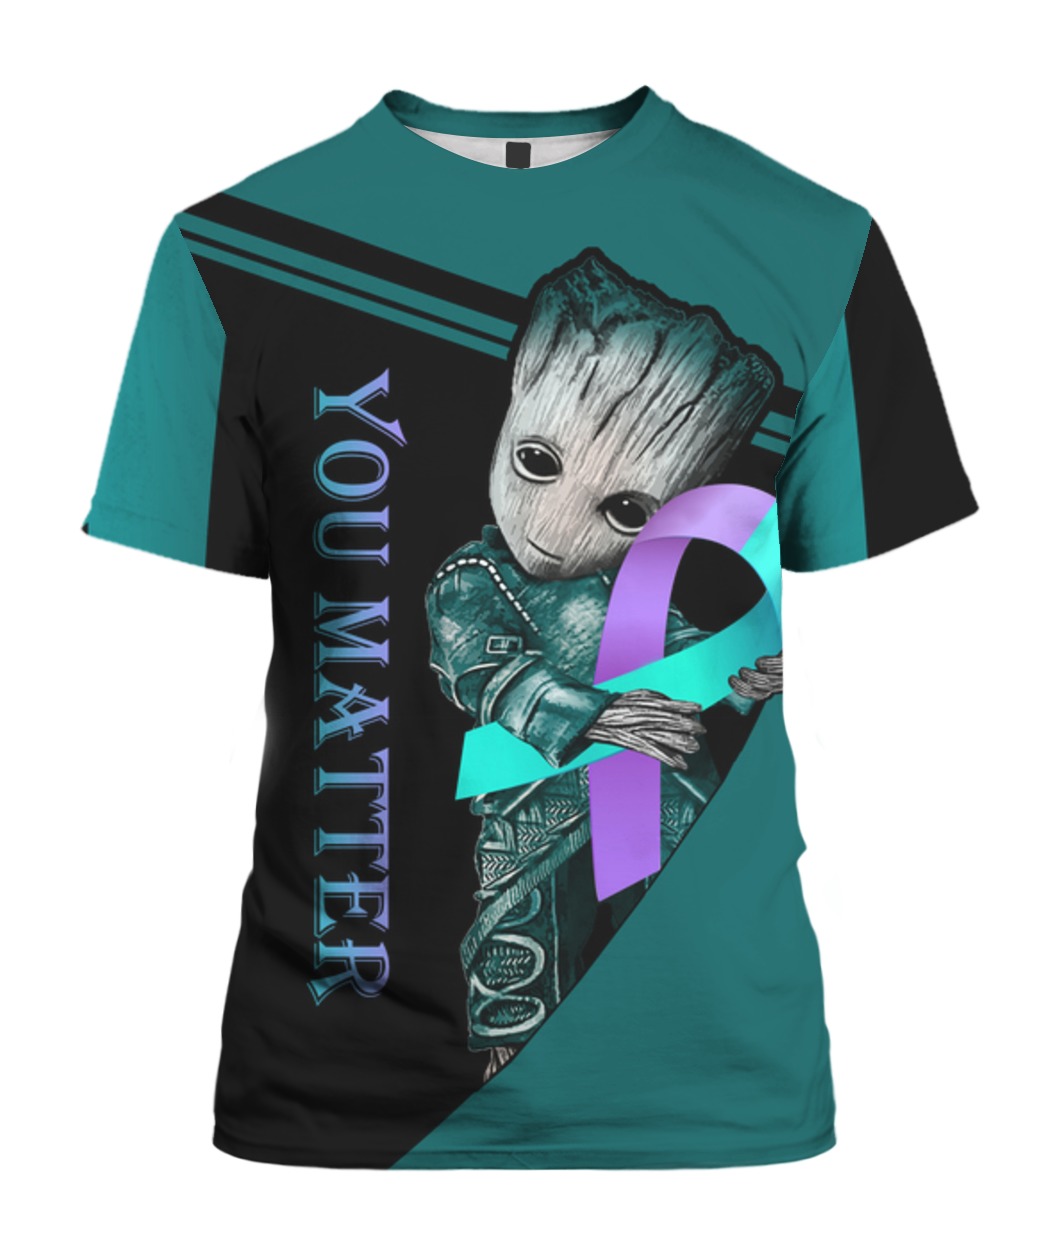 Groot hug suicide prevention awareness ribbon all over print tshirt